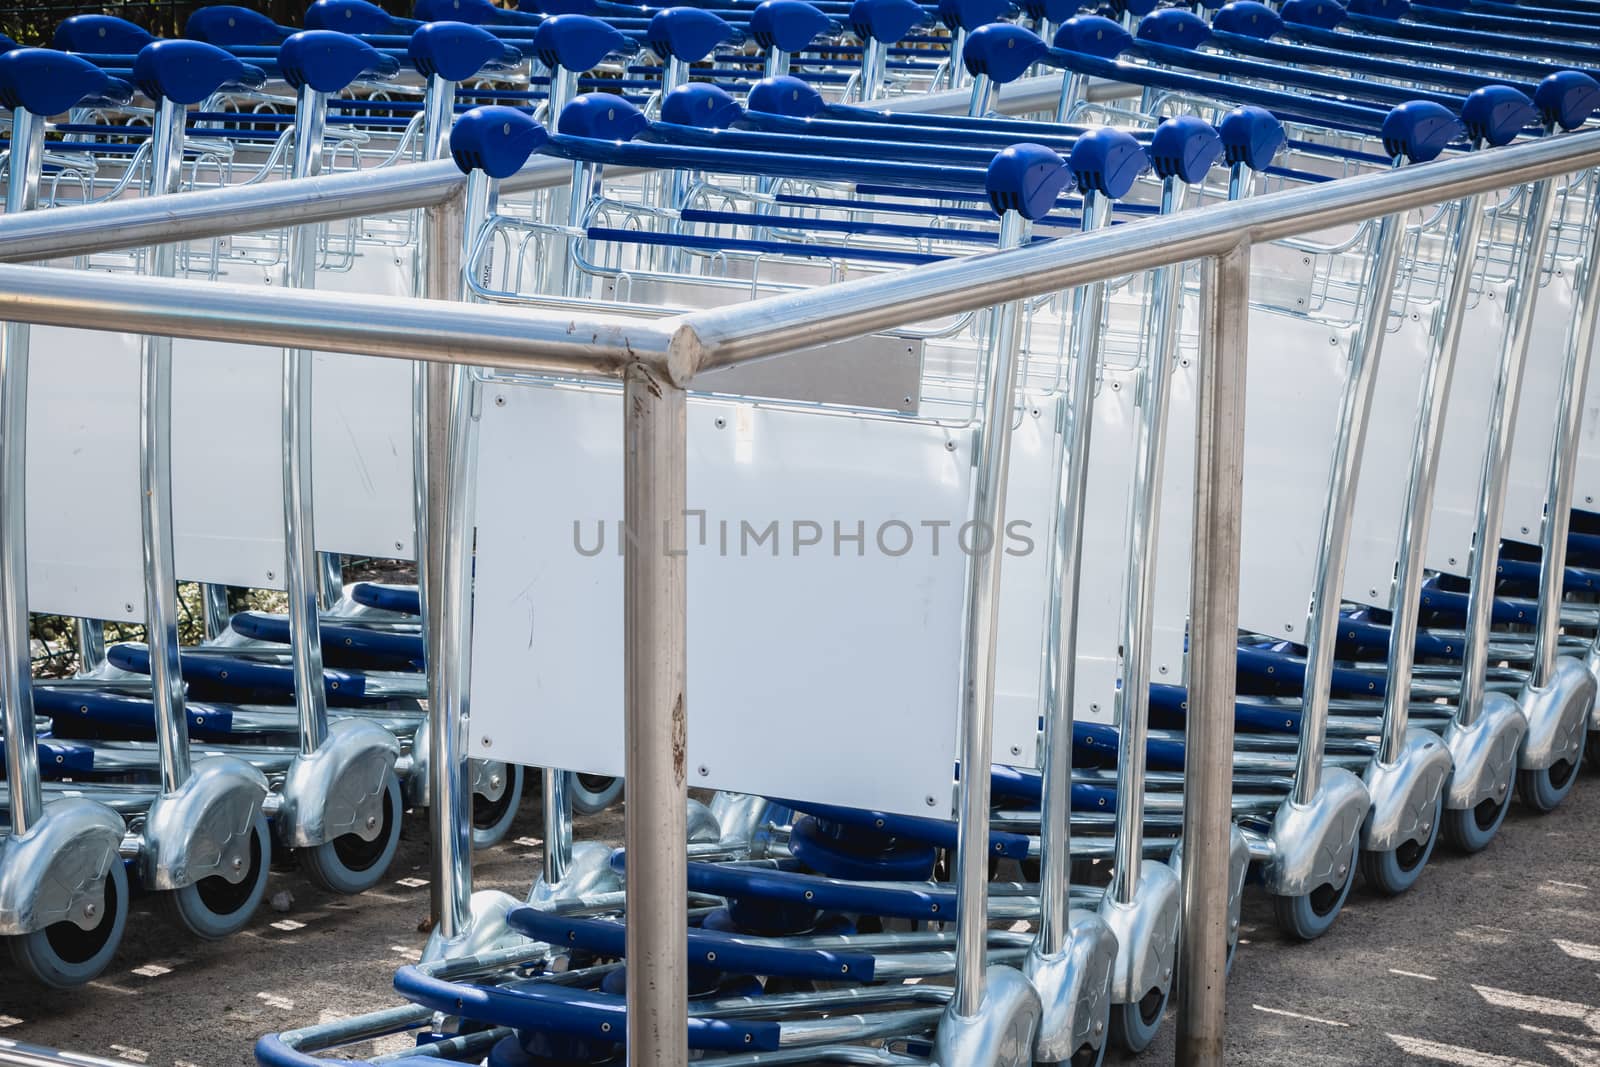 carry cart outside an airport available to travelers by AtlanticEUROSTOXX